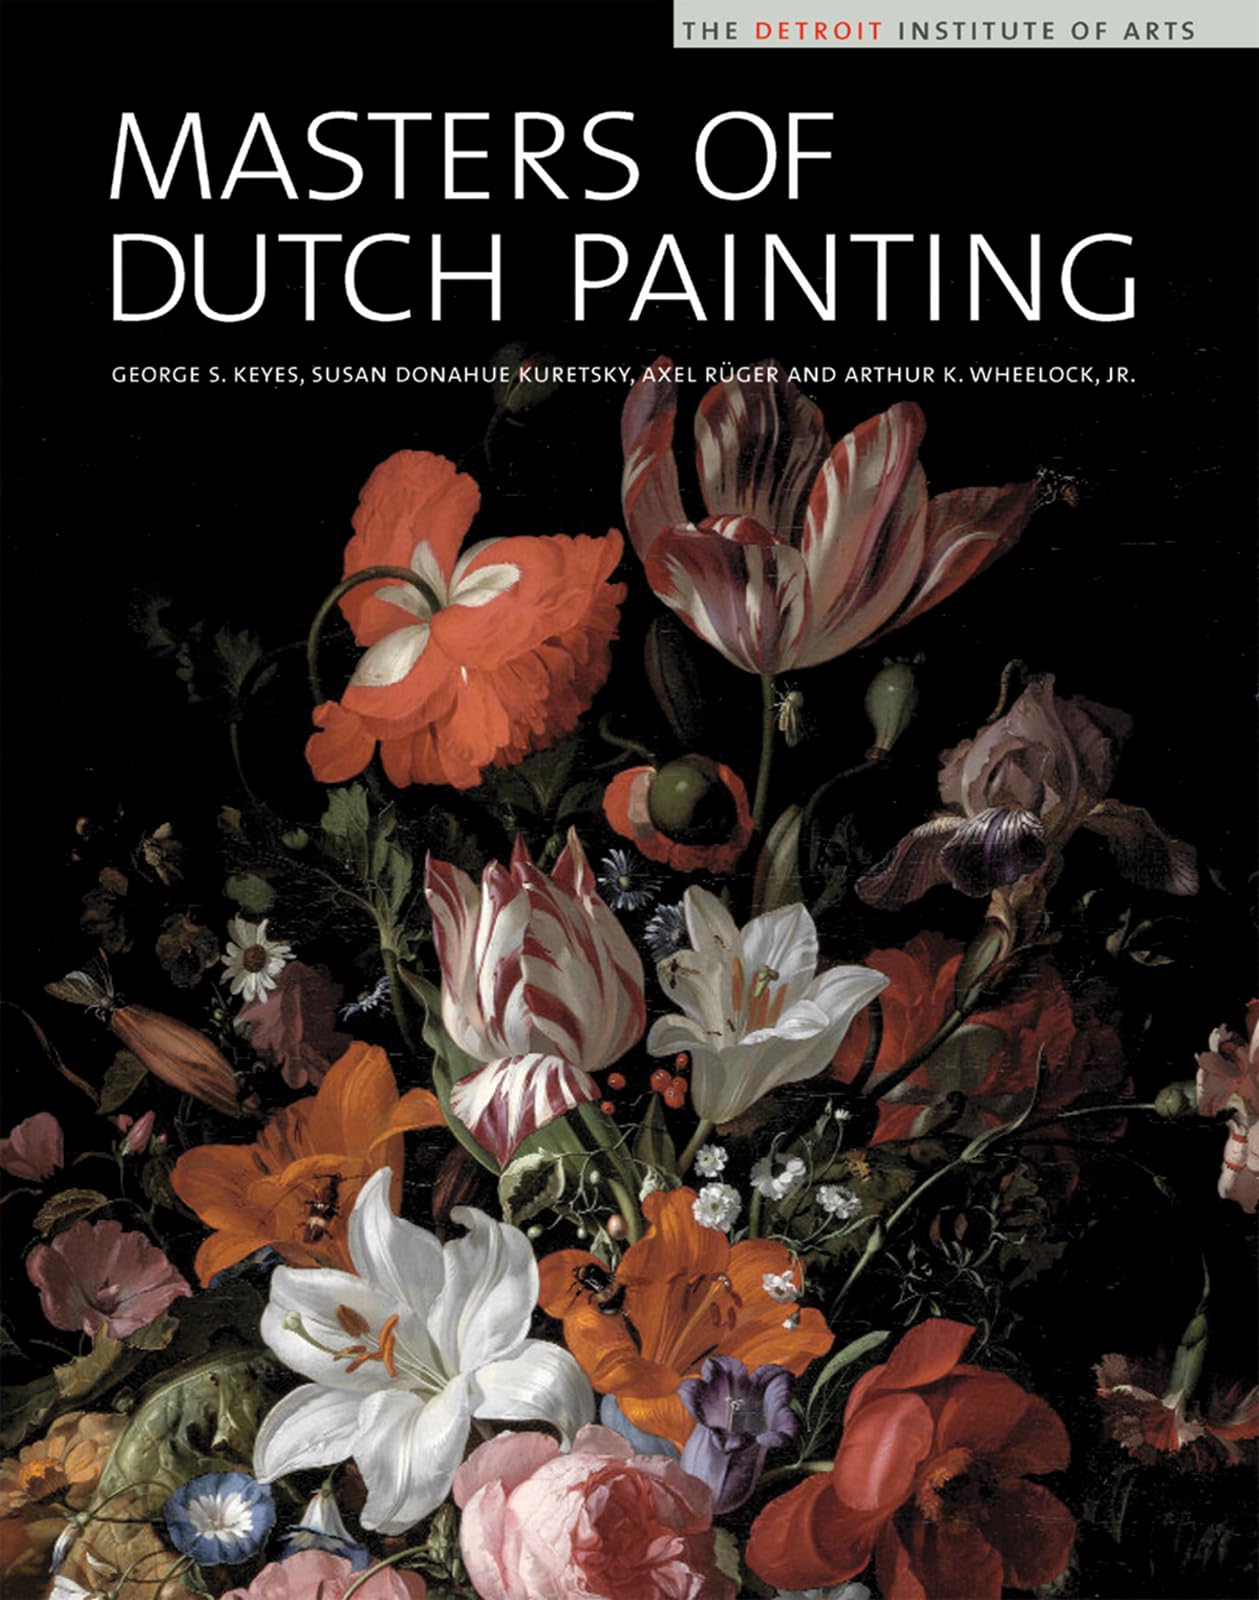 Masters of Dutch Painting: The Detroit Institute of Arts